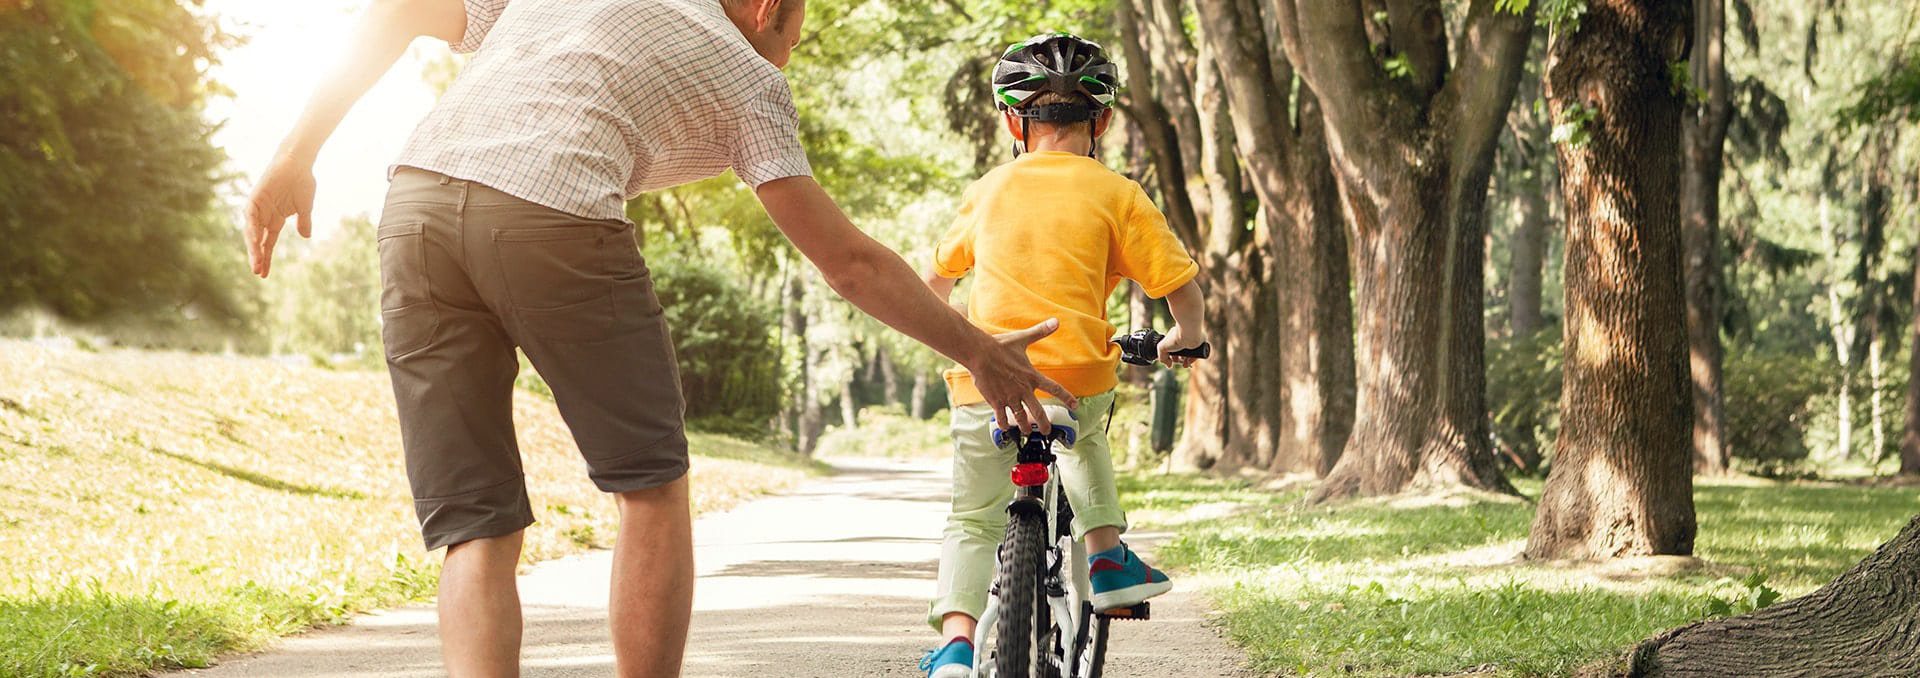 Father on tree-lined sidewalk teaching child to ride a bike